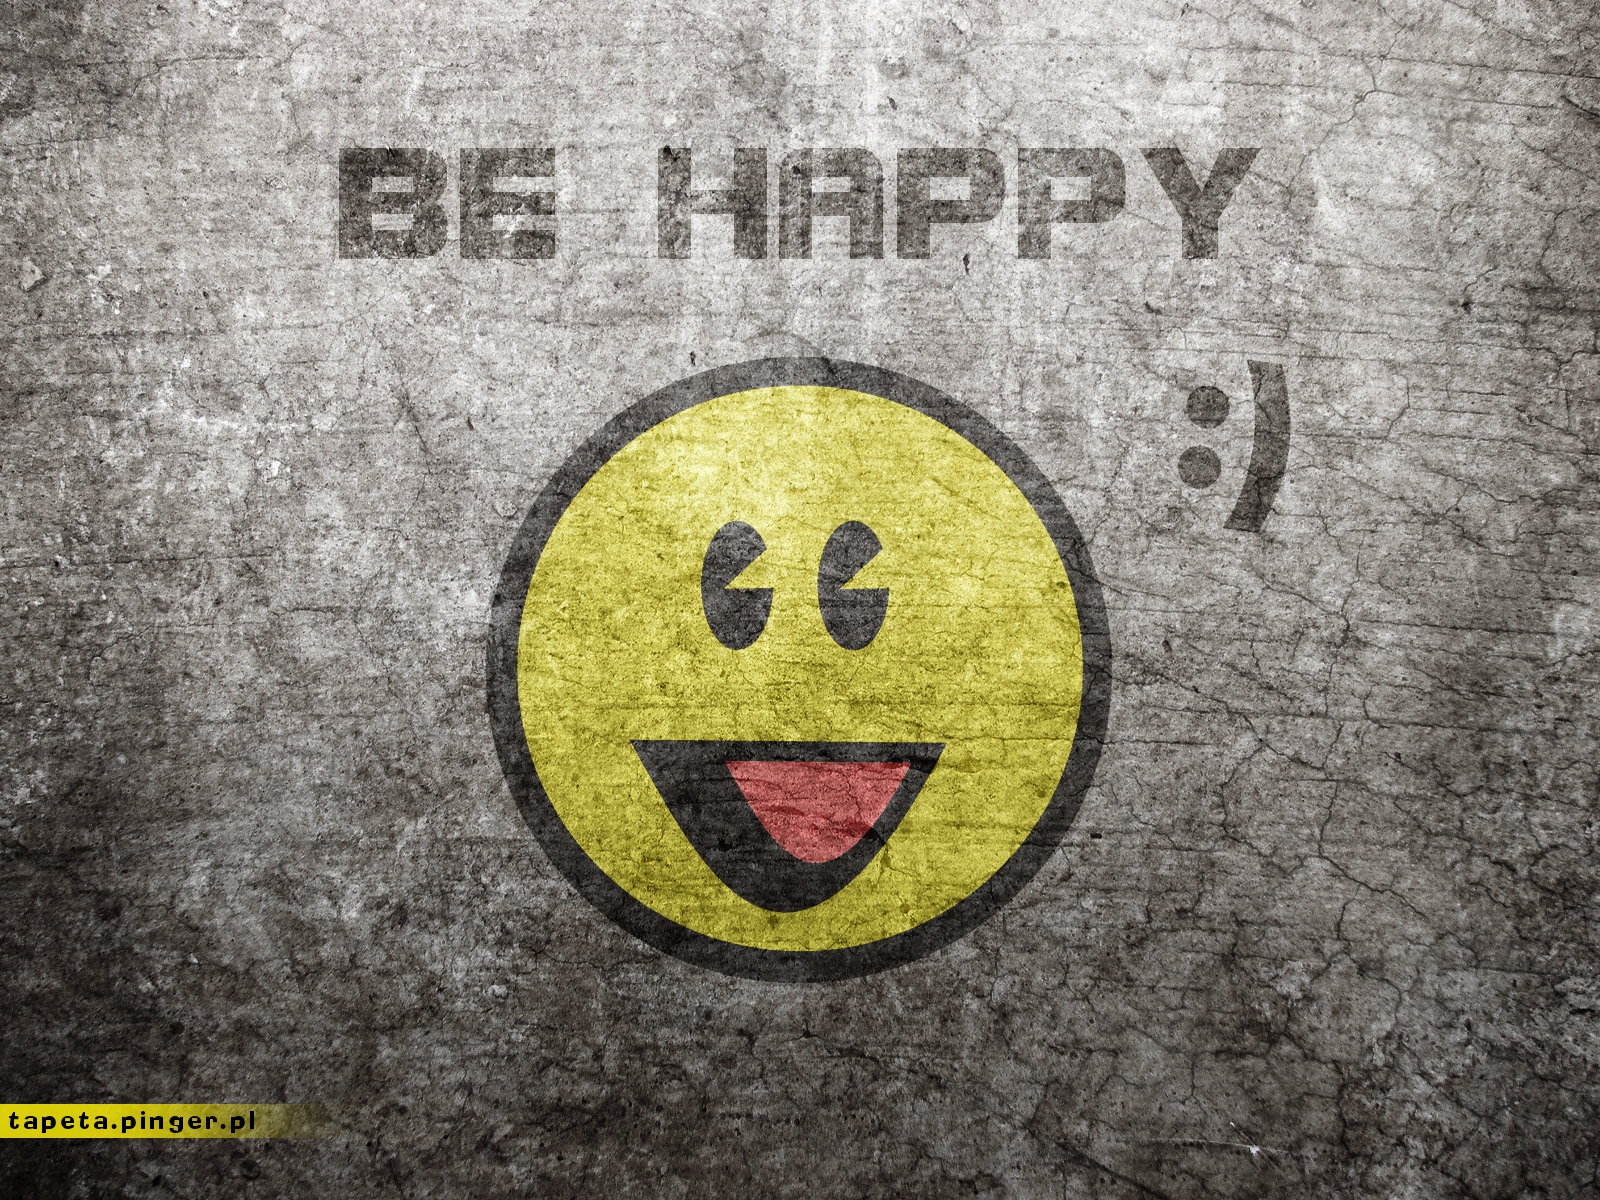 So be happy tapeta tapety wallpaper wallpapers smile umiech   Tapety